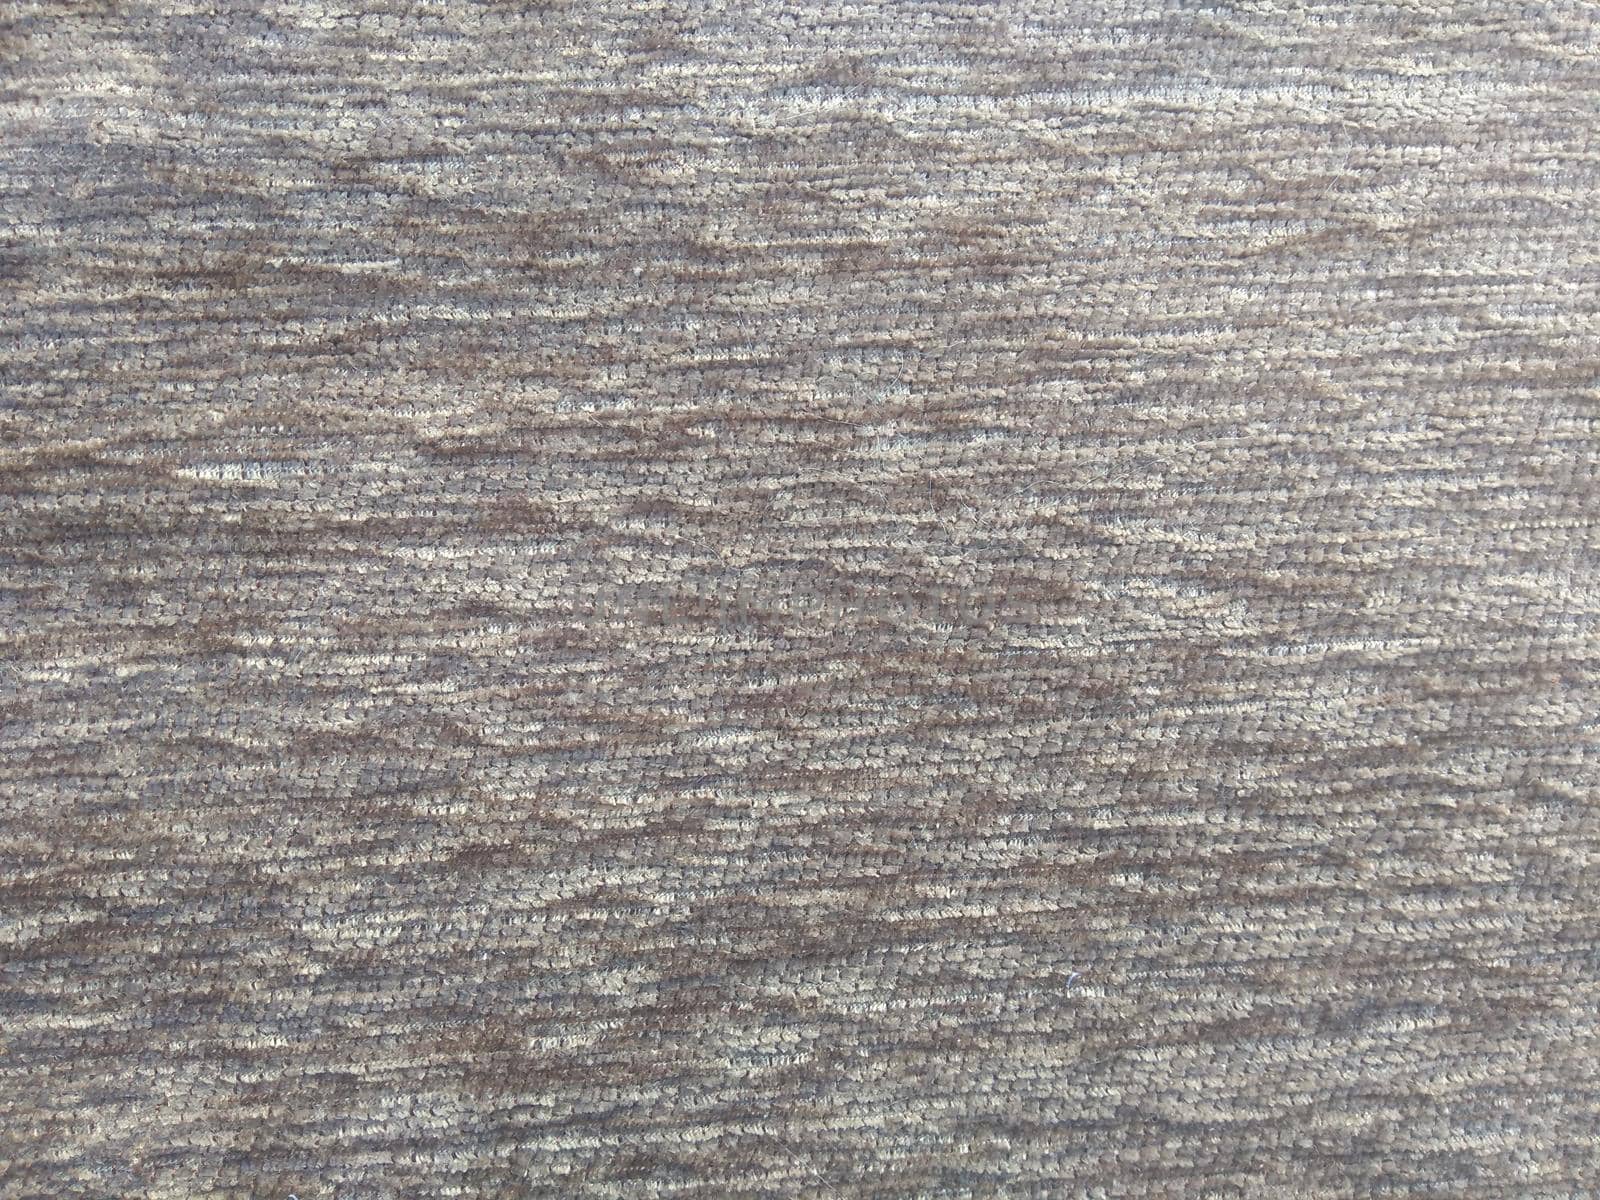 Fashionable texture fabric for interiors furniture manufacture and use.